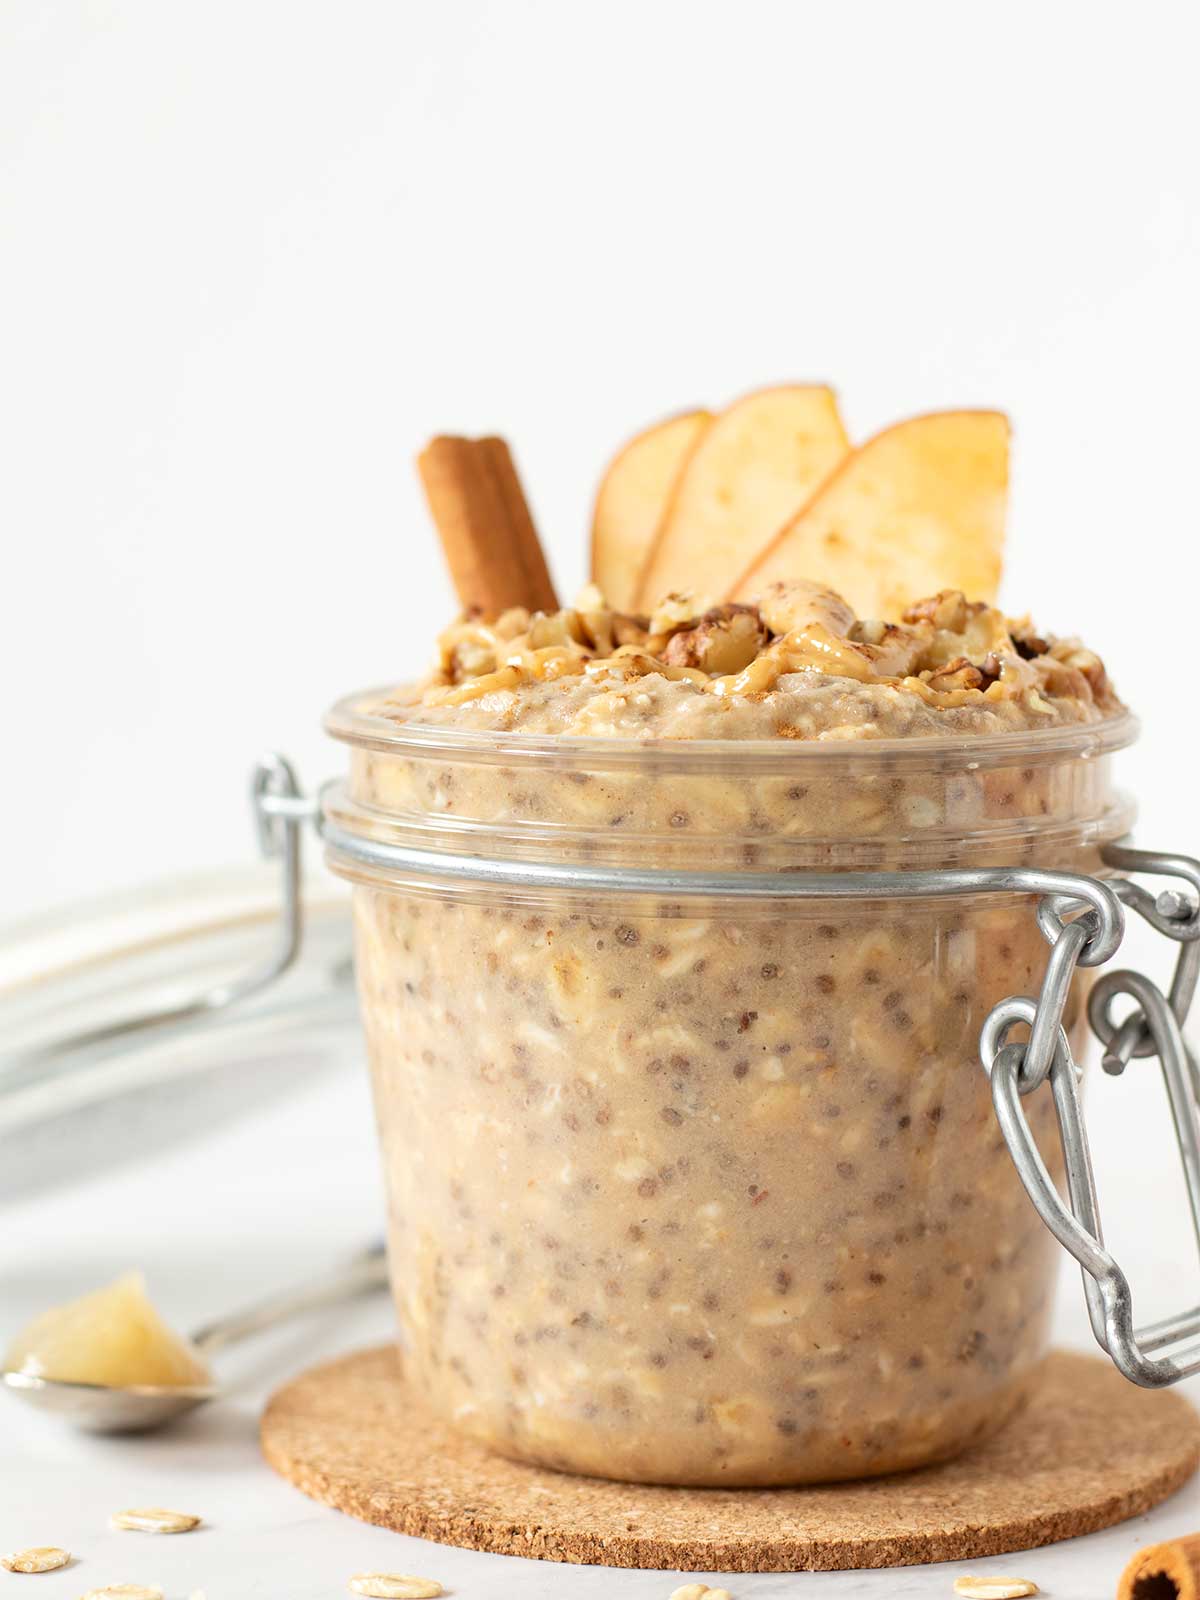 Creamy applesauce overnight oatmeal with cinnamon and peanut butter.